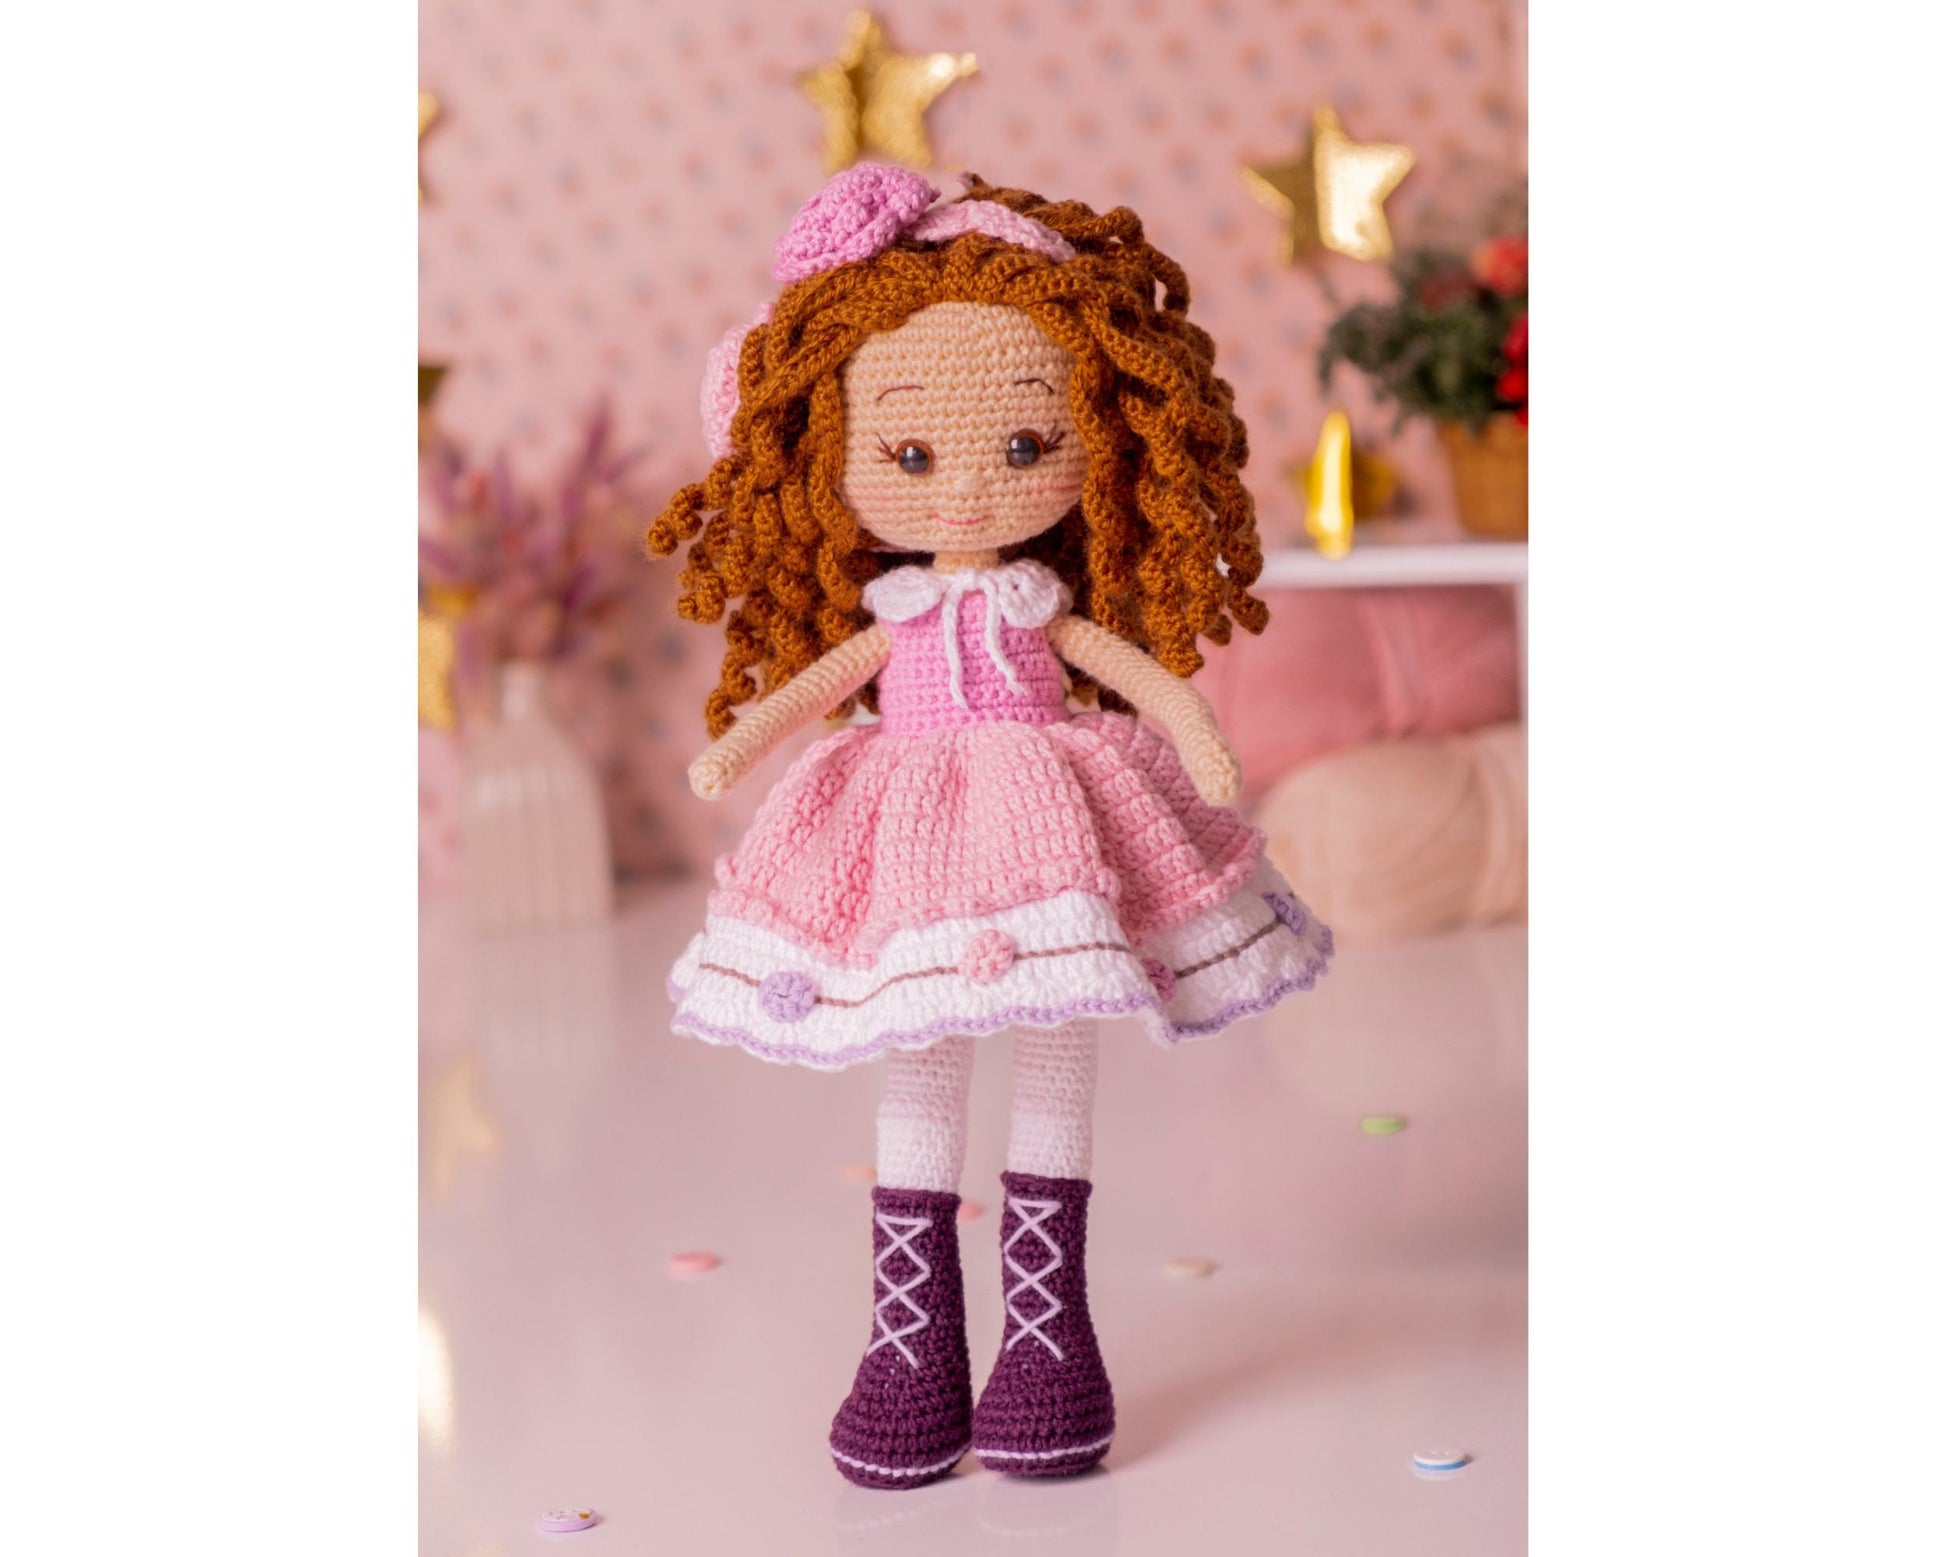 Cute Party Dress Curled Hair Girl Crochet Doll, Beautiful Amigurumi Doll in Purple Boots, CHRISTMAS Gift for Daughter, Stuffed Toy Present